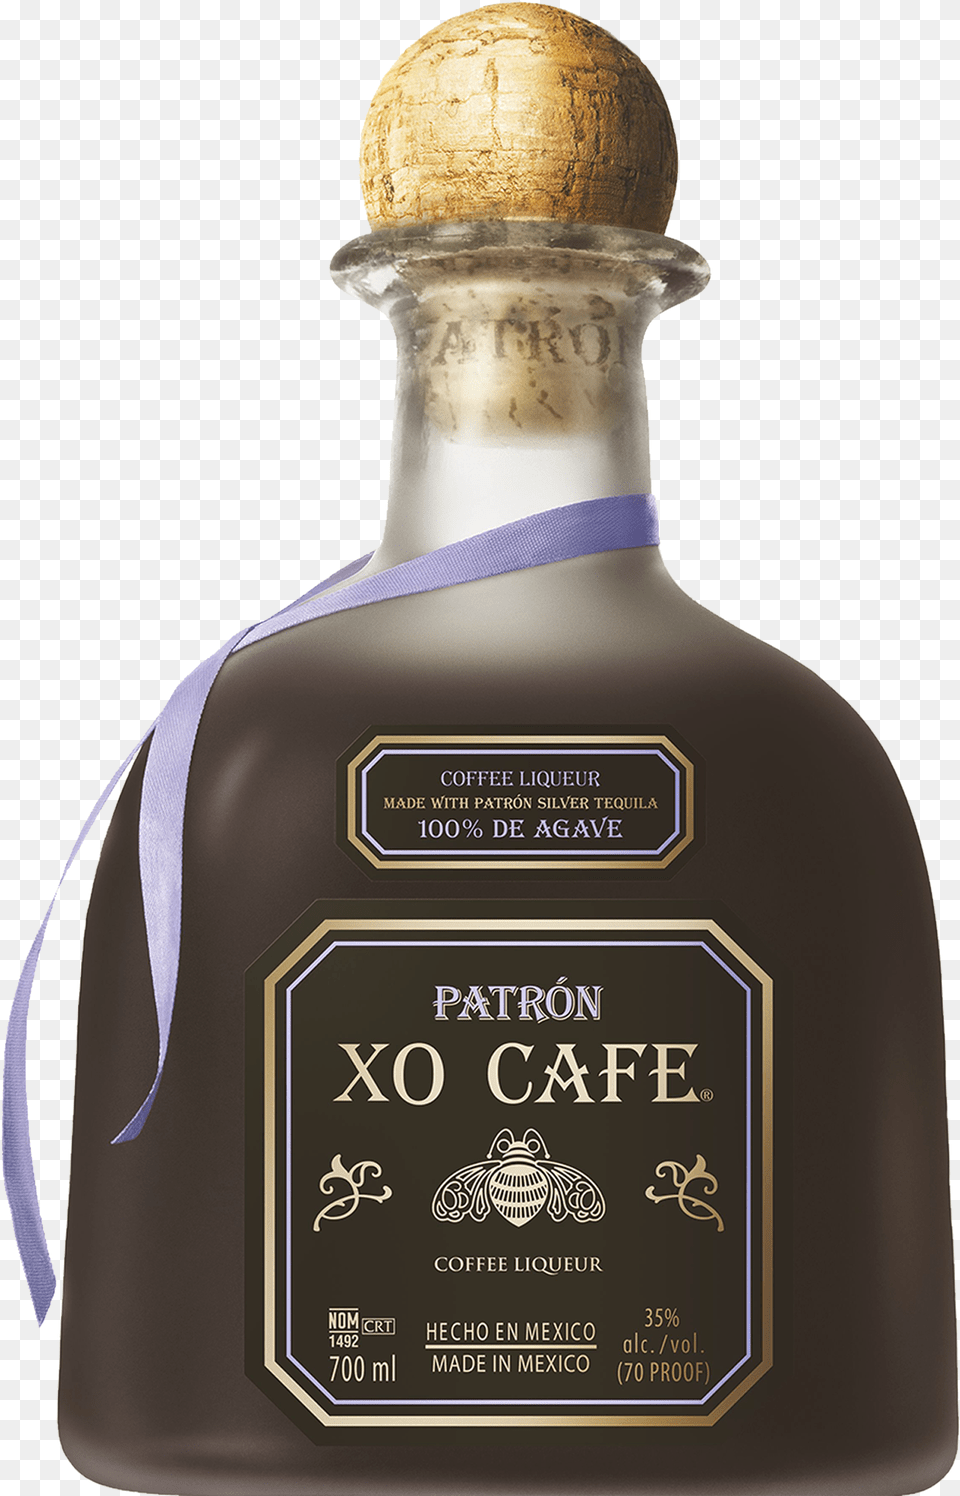 Patrn Xo Caf 700ml Cafe Patron, Alcohol, Beverage, Liquor, Tequila Png Image